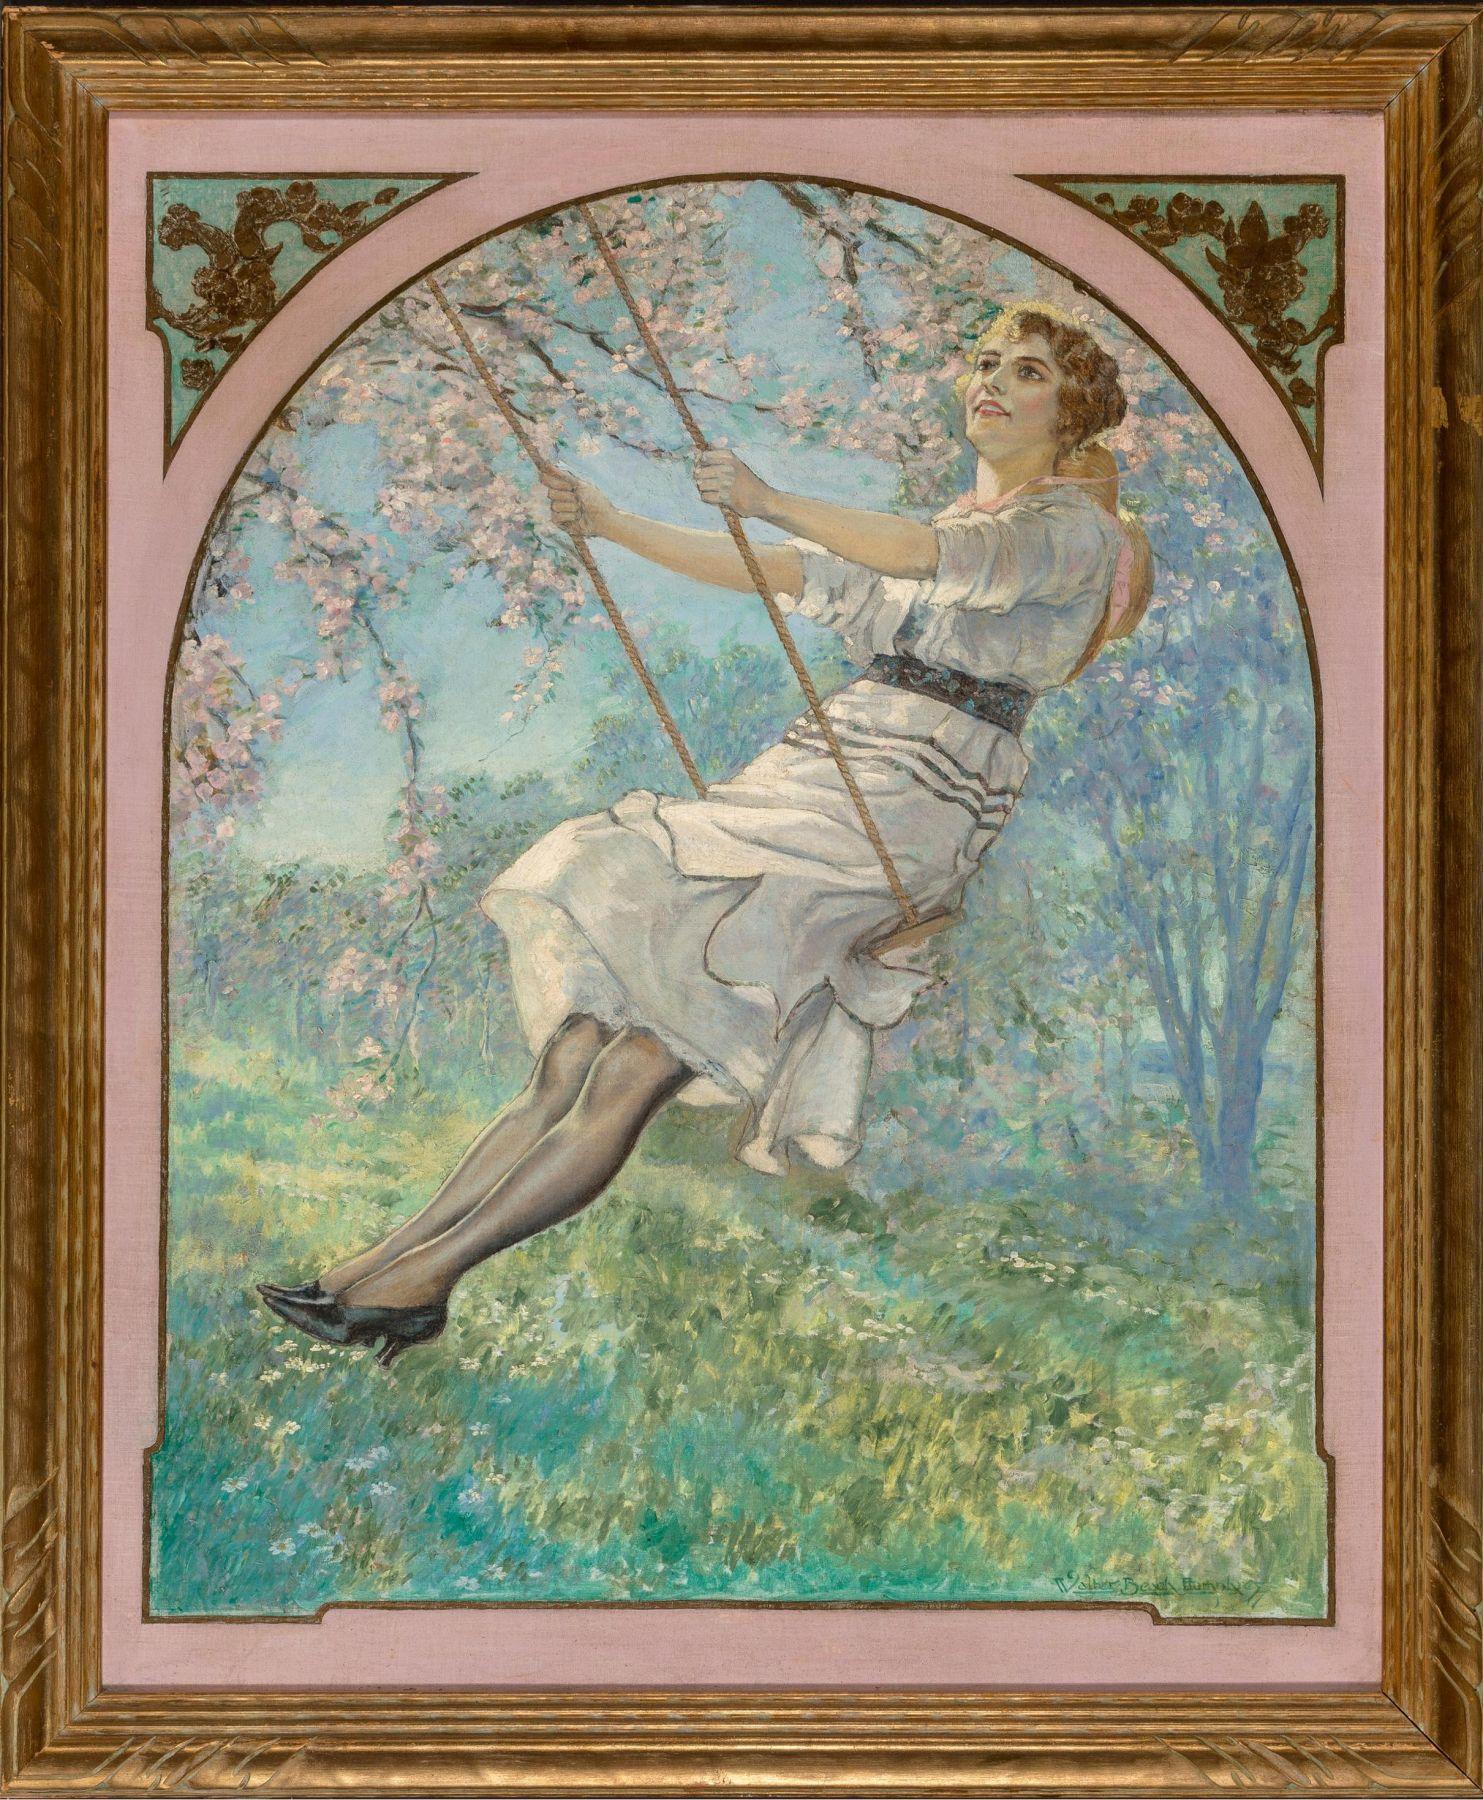 Lady on Swing - Painting by Walter Beach Humphrey